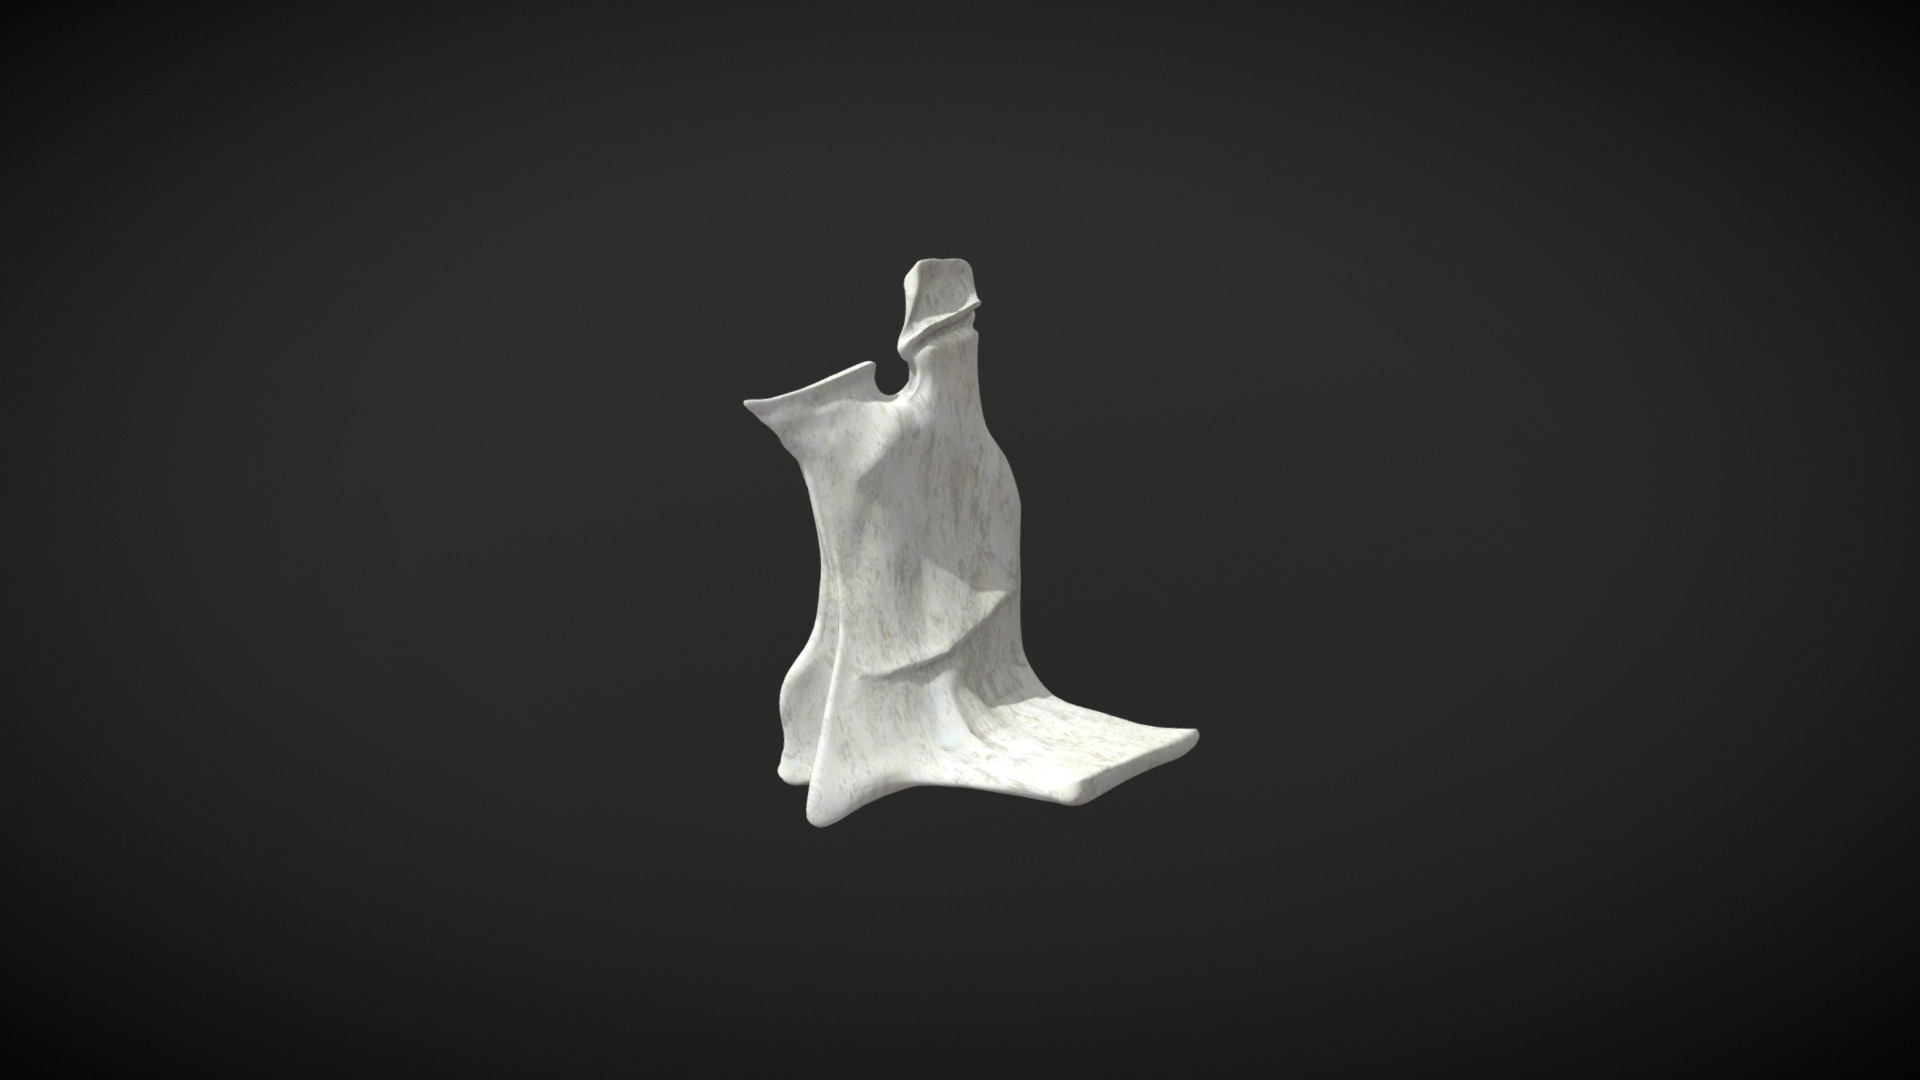 3D model Palatine bone / Hueso Palatino - This is a 3D model of the Palatine bone / Hueso Palatino. The 3D model is about a white bird on a black background.